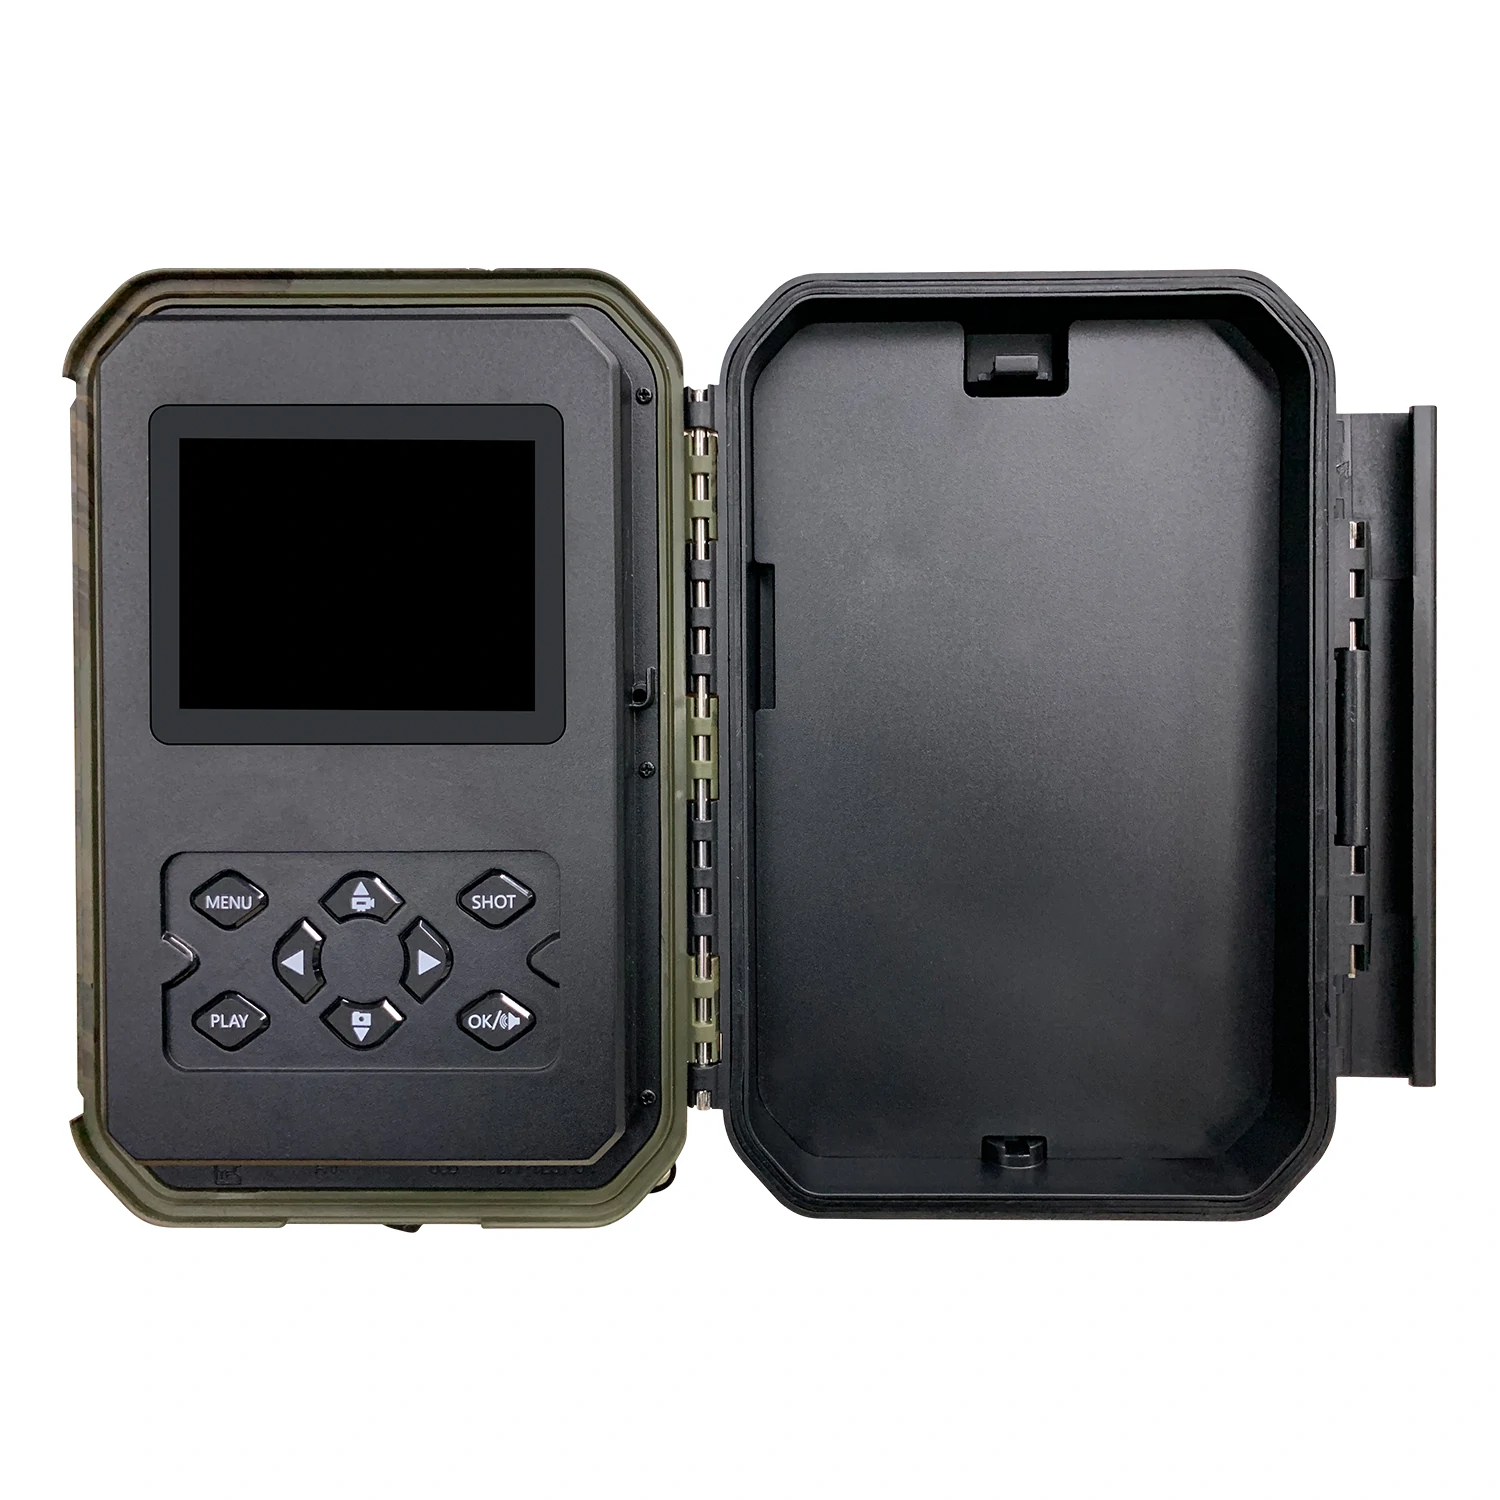 Find HB561 20MP 2 7K Hunting Camera Trail Cam Night Vision Waterproof IP56 0 2s Trigger Time Support Playing Animal Sounds for Home Security Wildlife Monitoring for Sale on Gipsybee.com